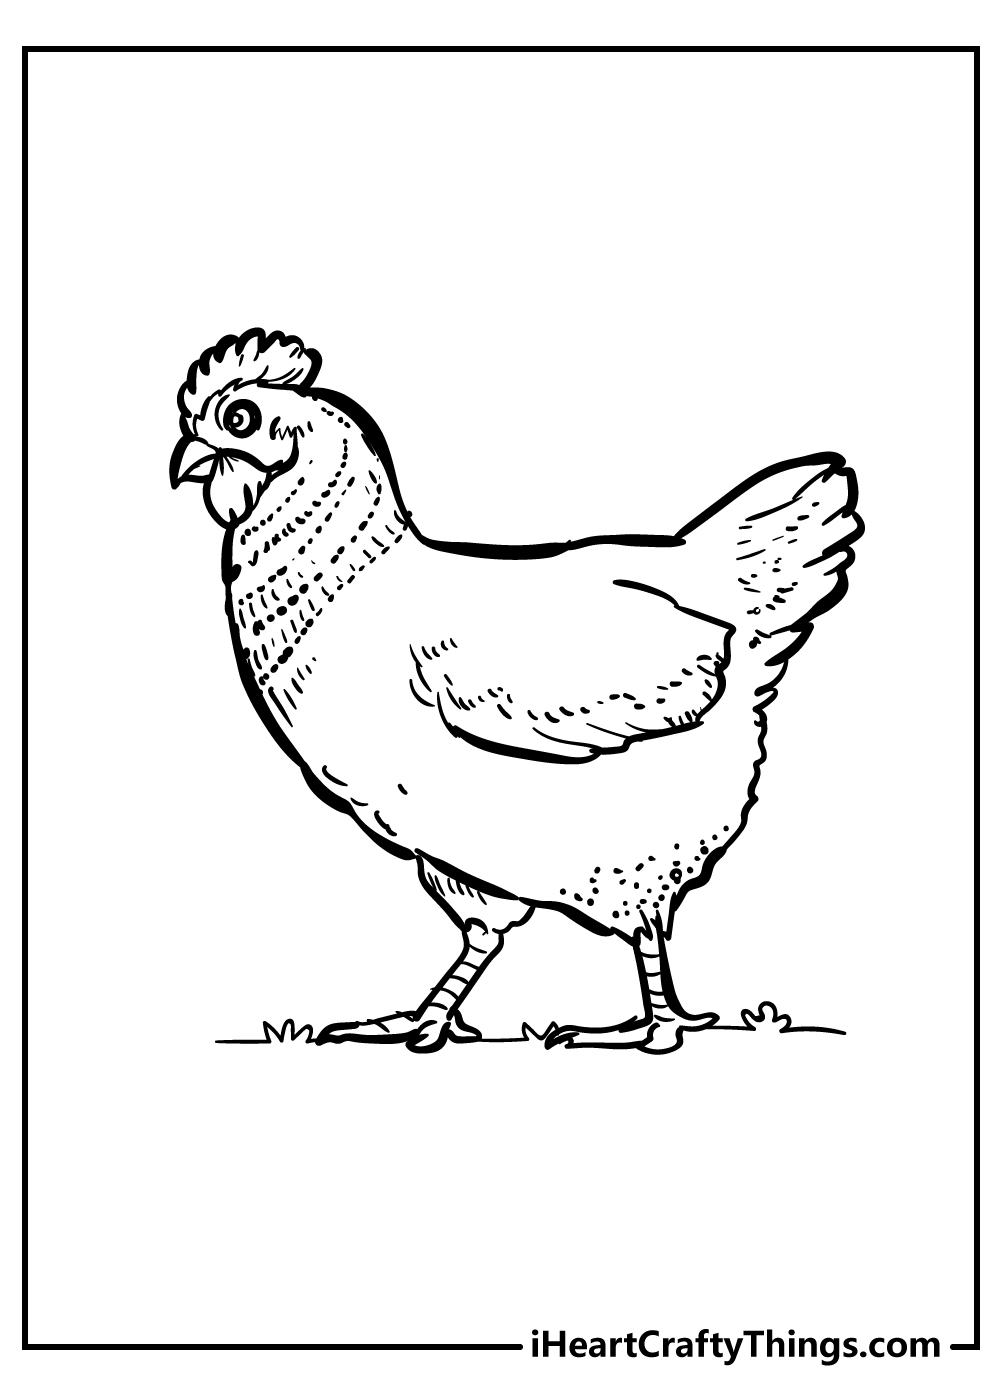 Chicken Coloring sheet for toddlers free printable